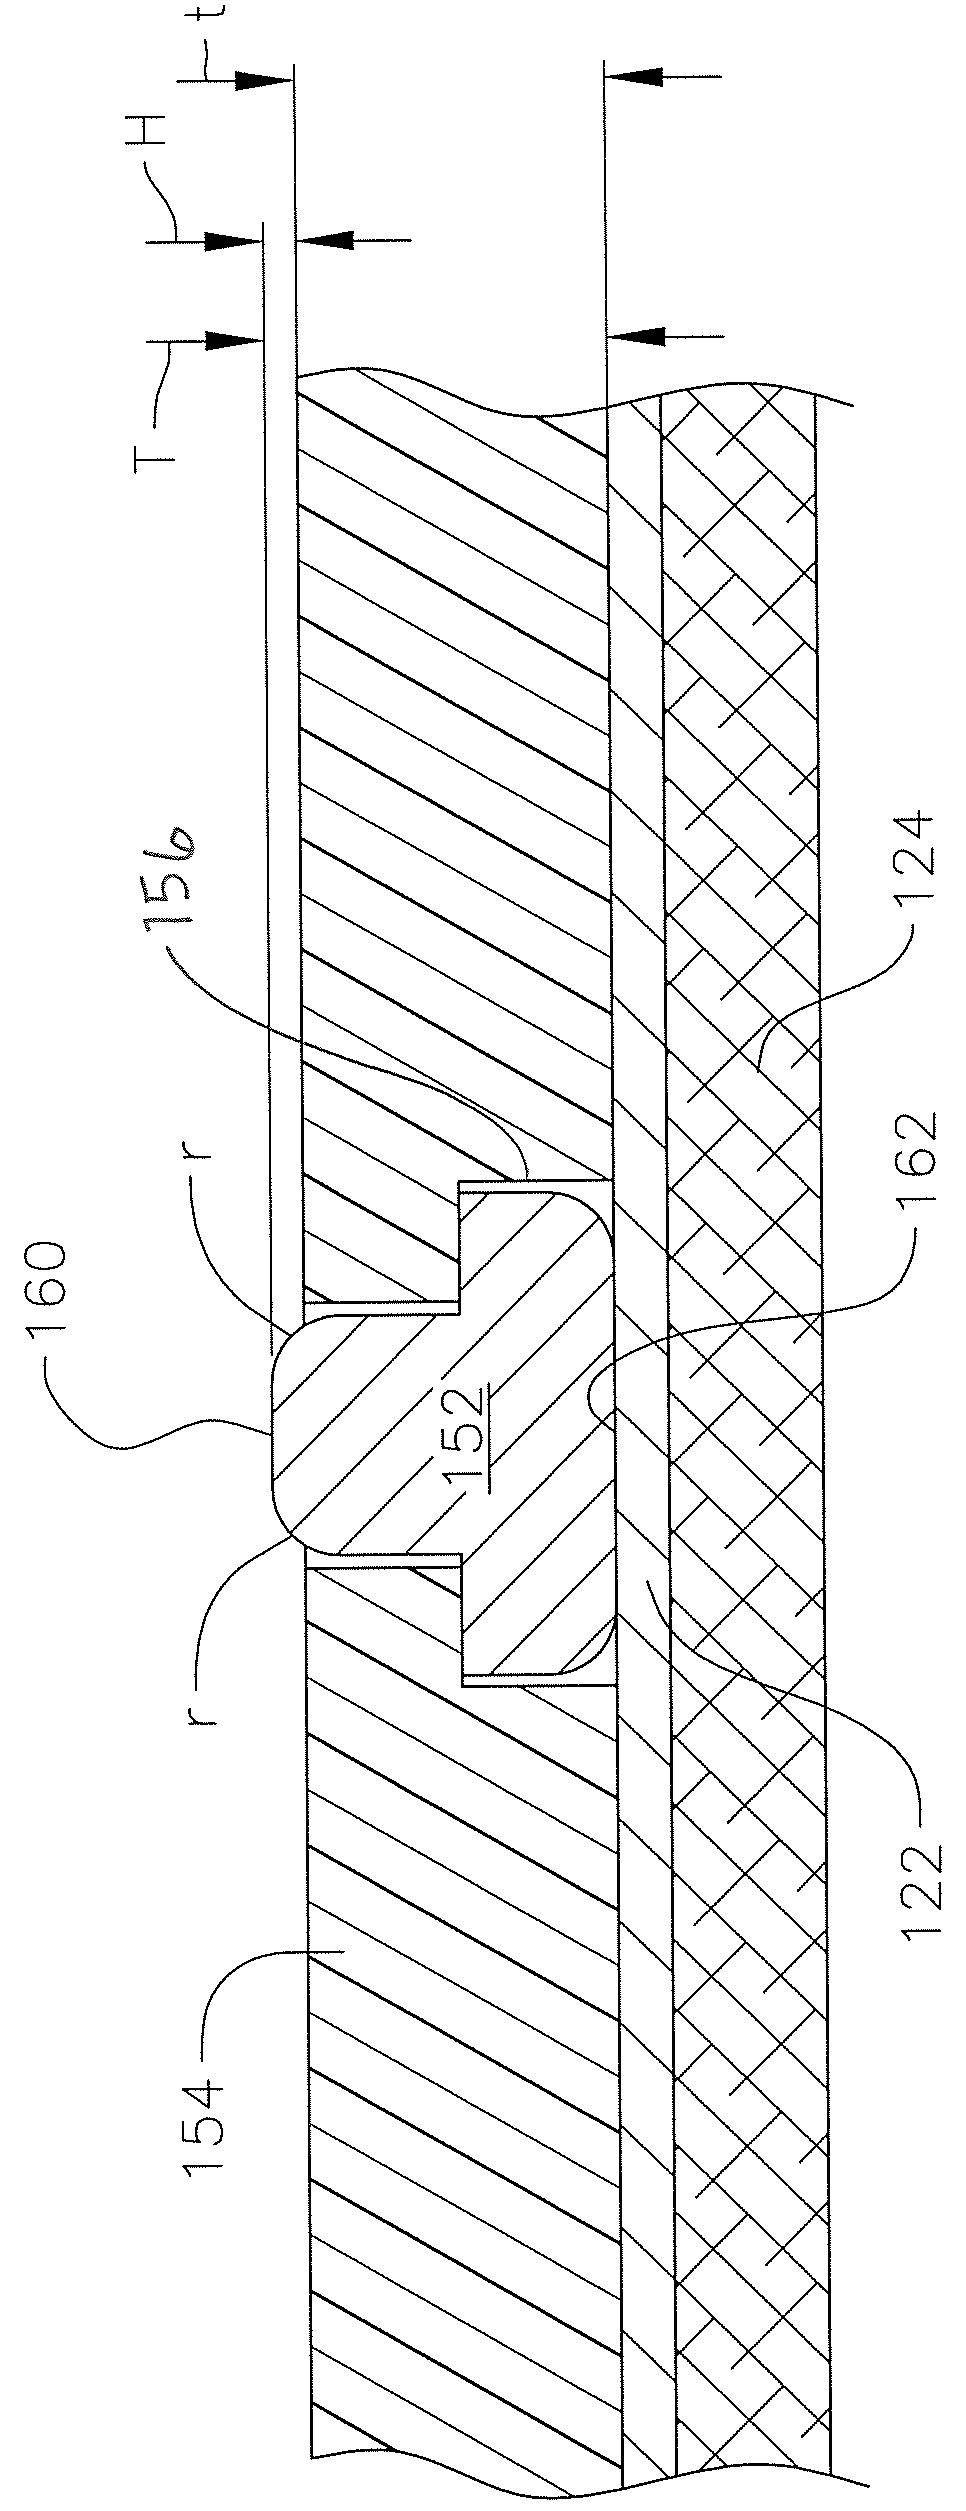 Single radio-transparent connector for multi-functional reference patch